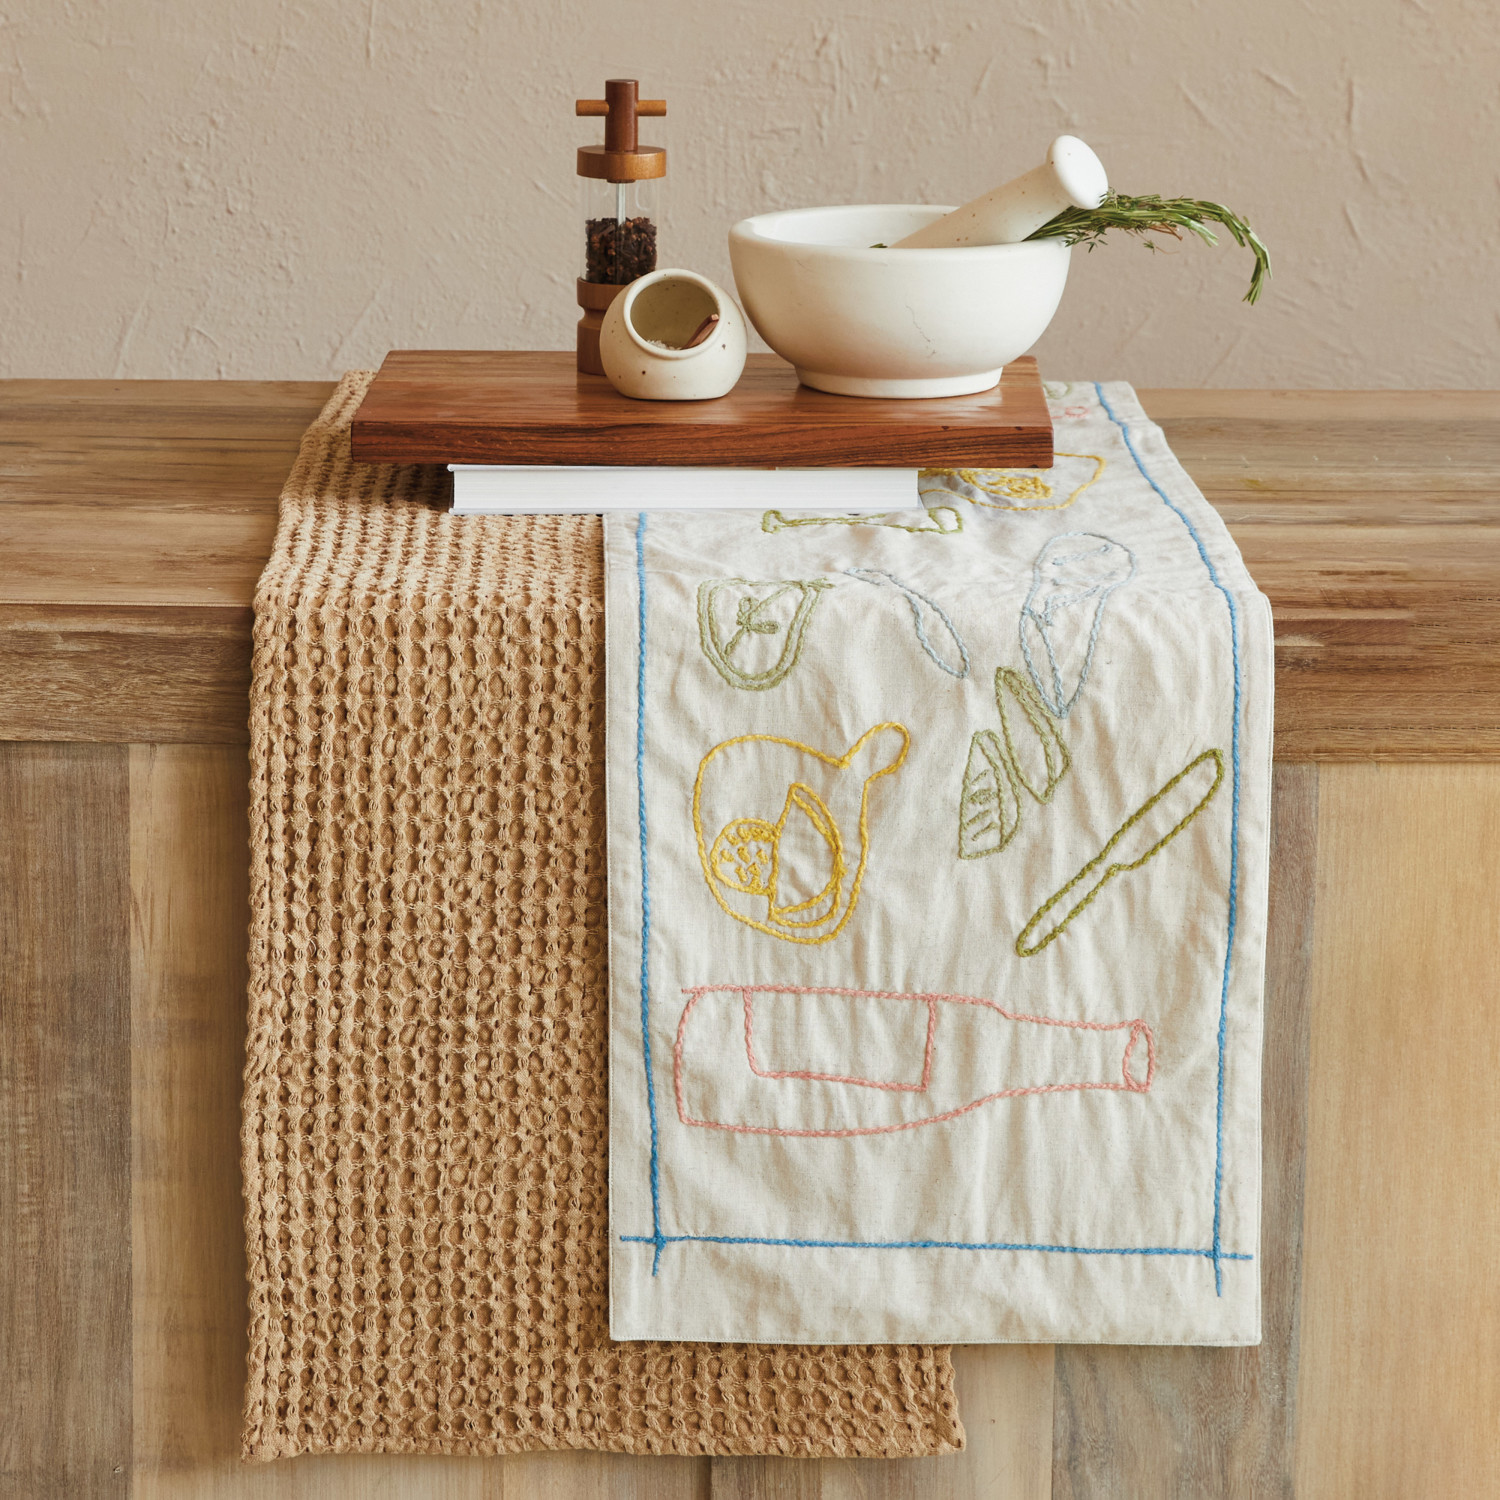 Woven Cotton Embroidered Table Runner w/ Tablescape